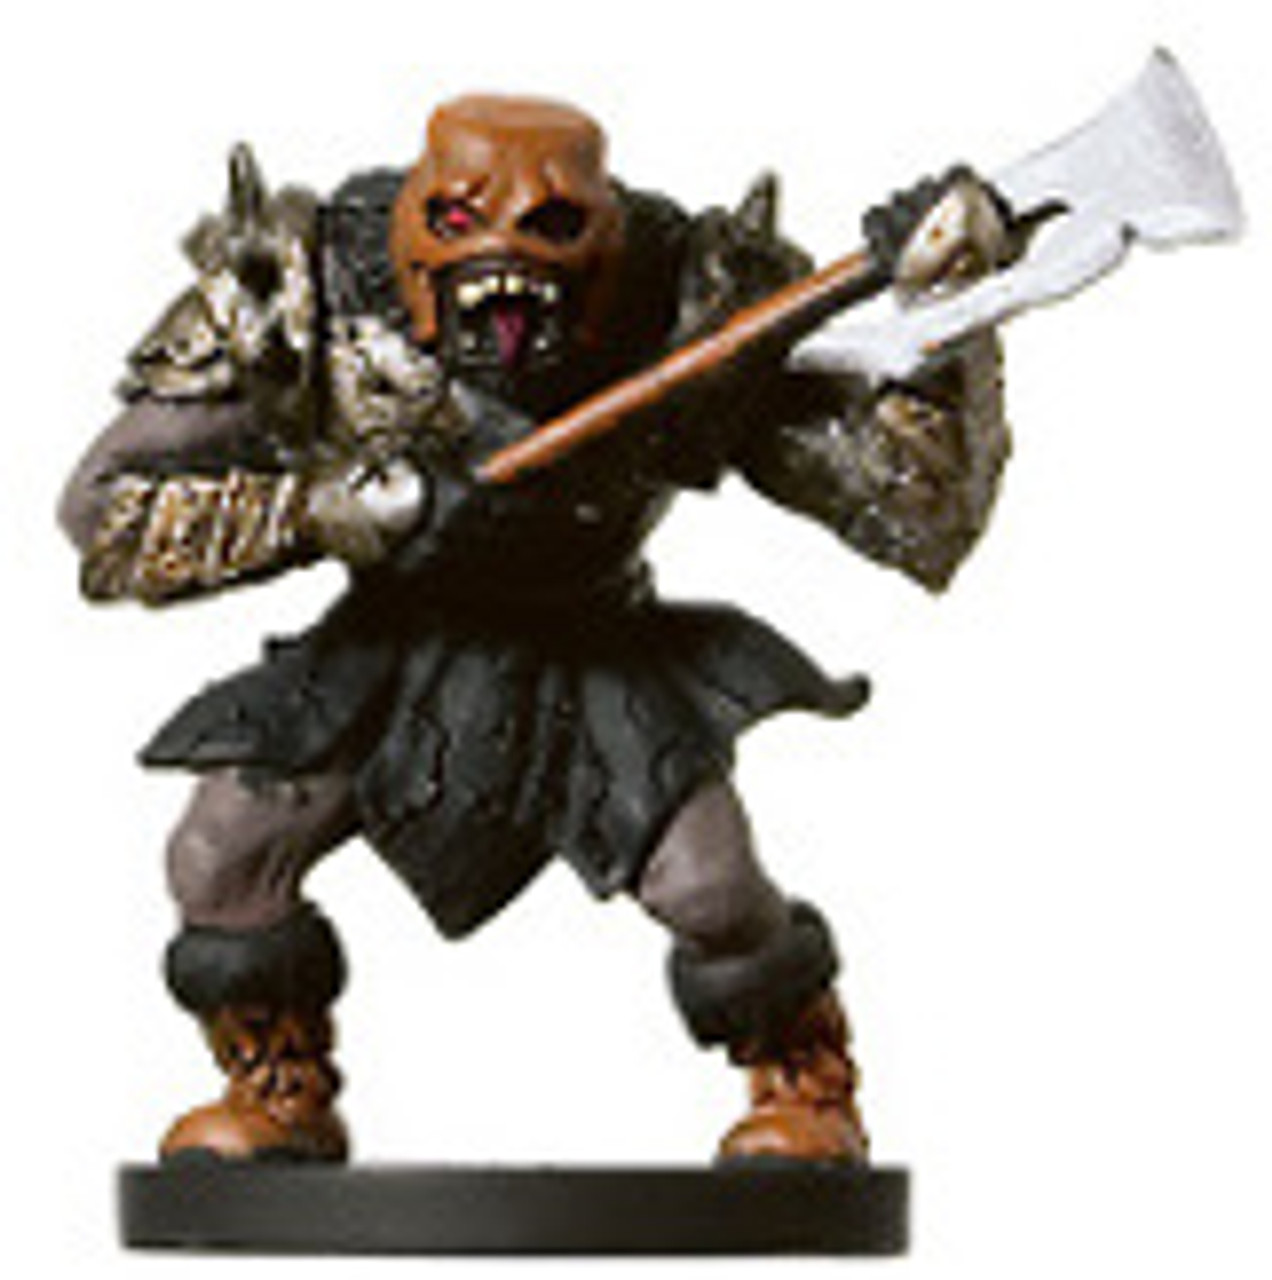 Howling Orc #52 (C) War Drums Dungeons & Dragons Miniatures New!